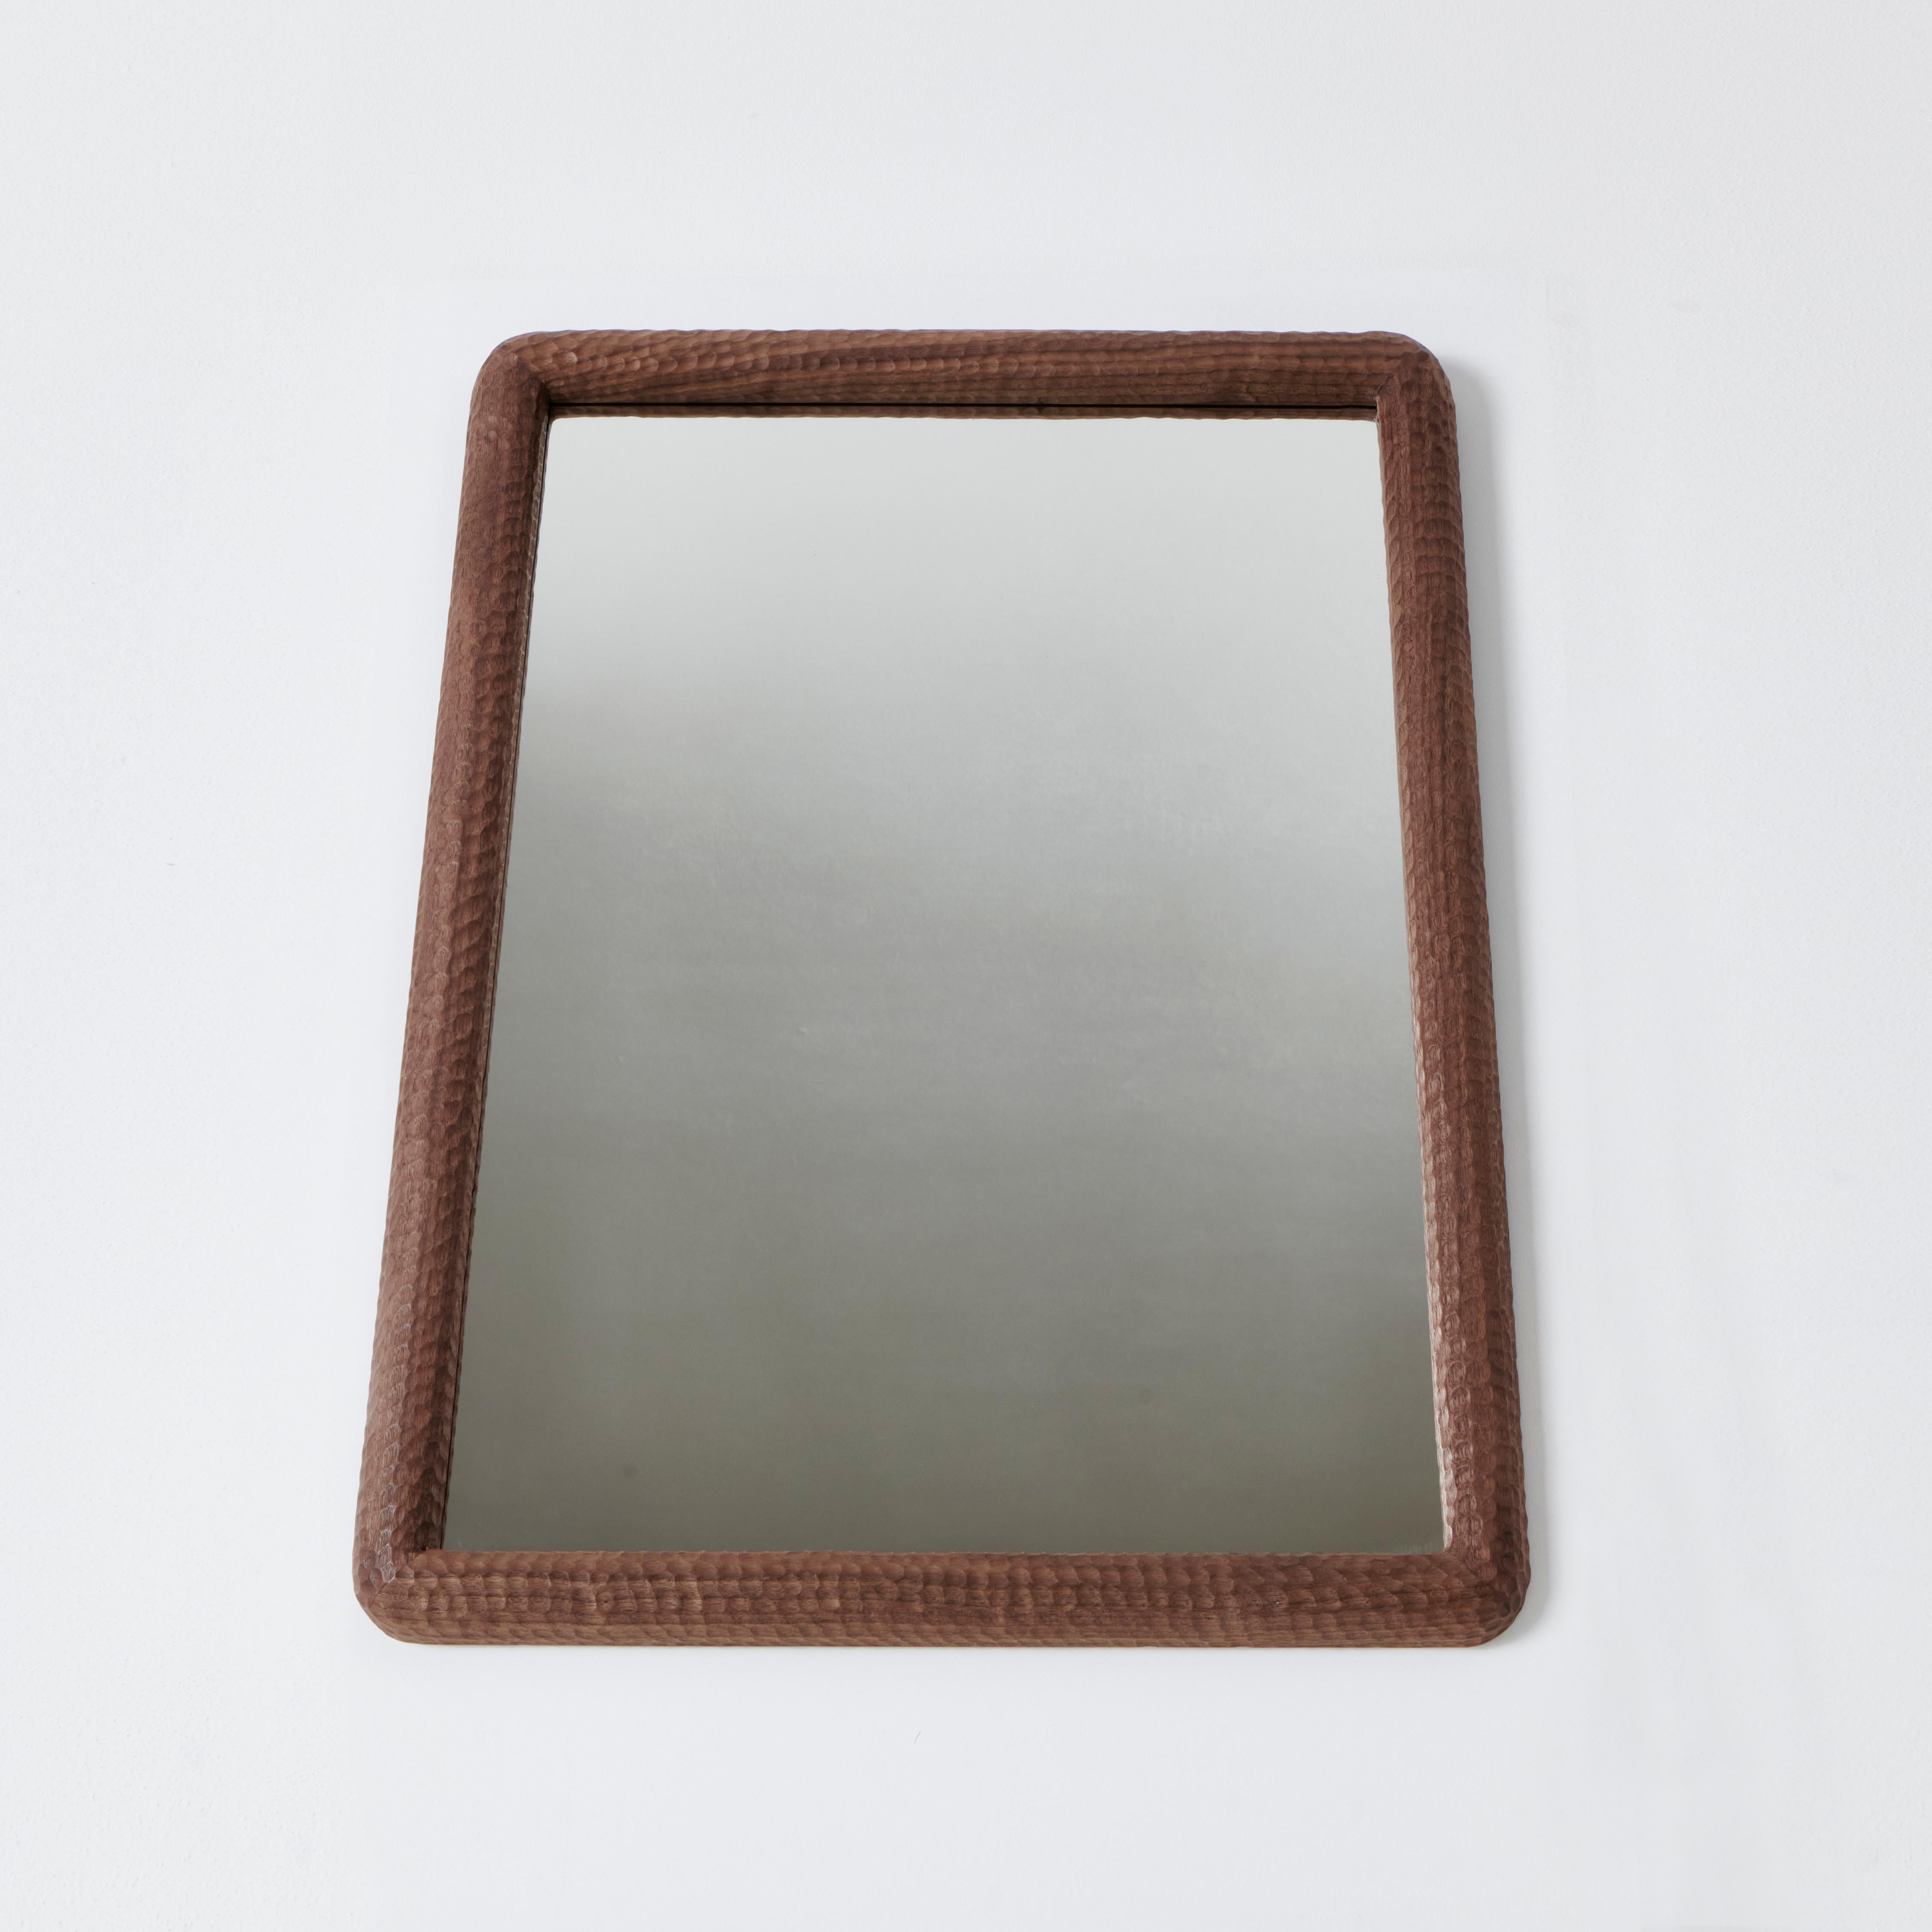 Amarante Mirror
Designed in 2024 by Project 213A

The Amarante Mirror is trapez shaped and framed in solid wood. 
Crafted by Skilled artisans in Northern Portugal and finished in a gouged texture

Bespoke dimensions available upon request


Please